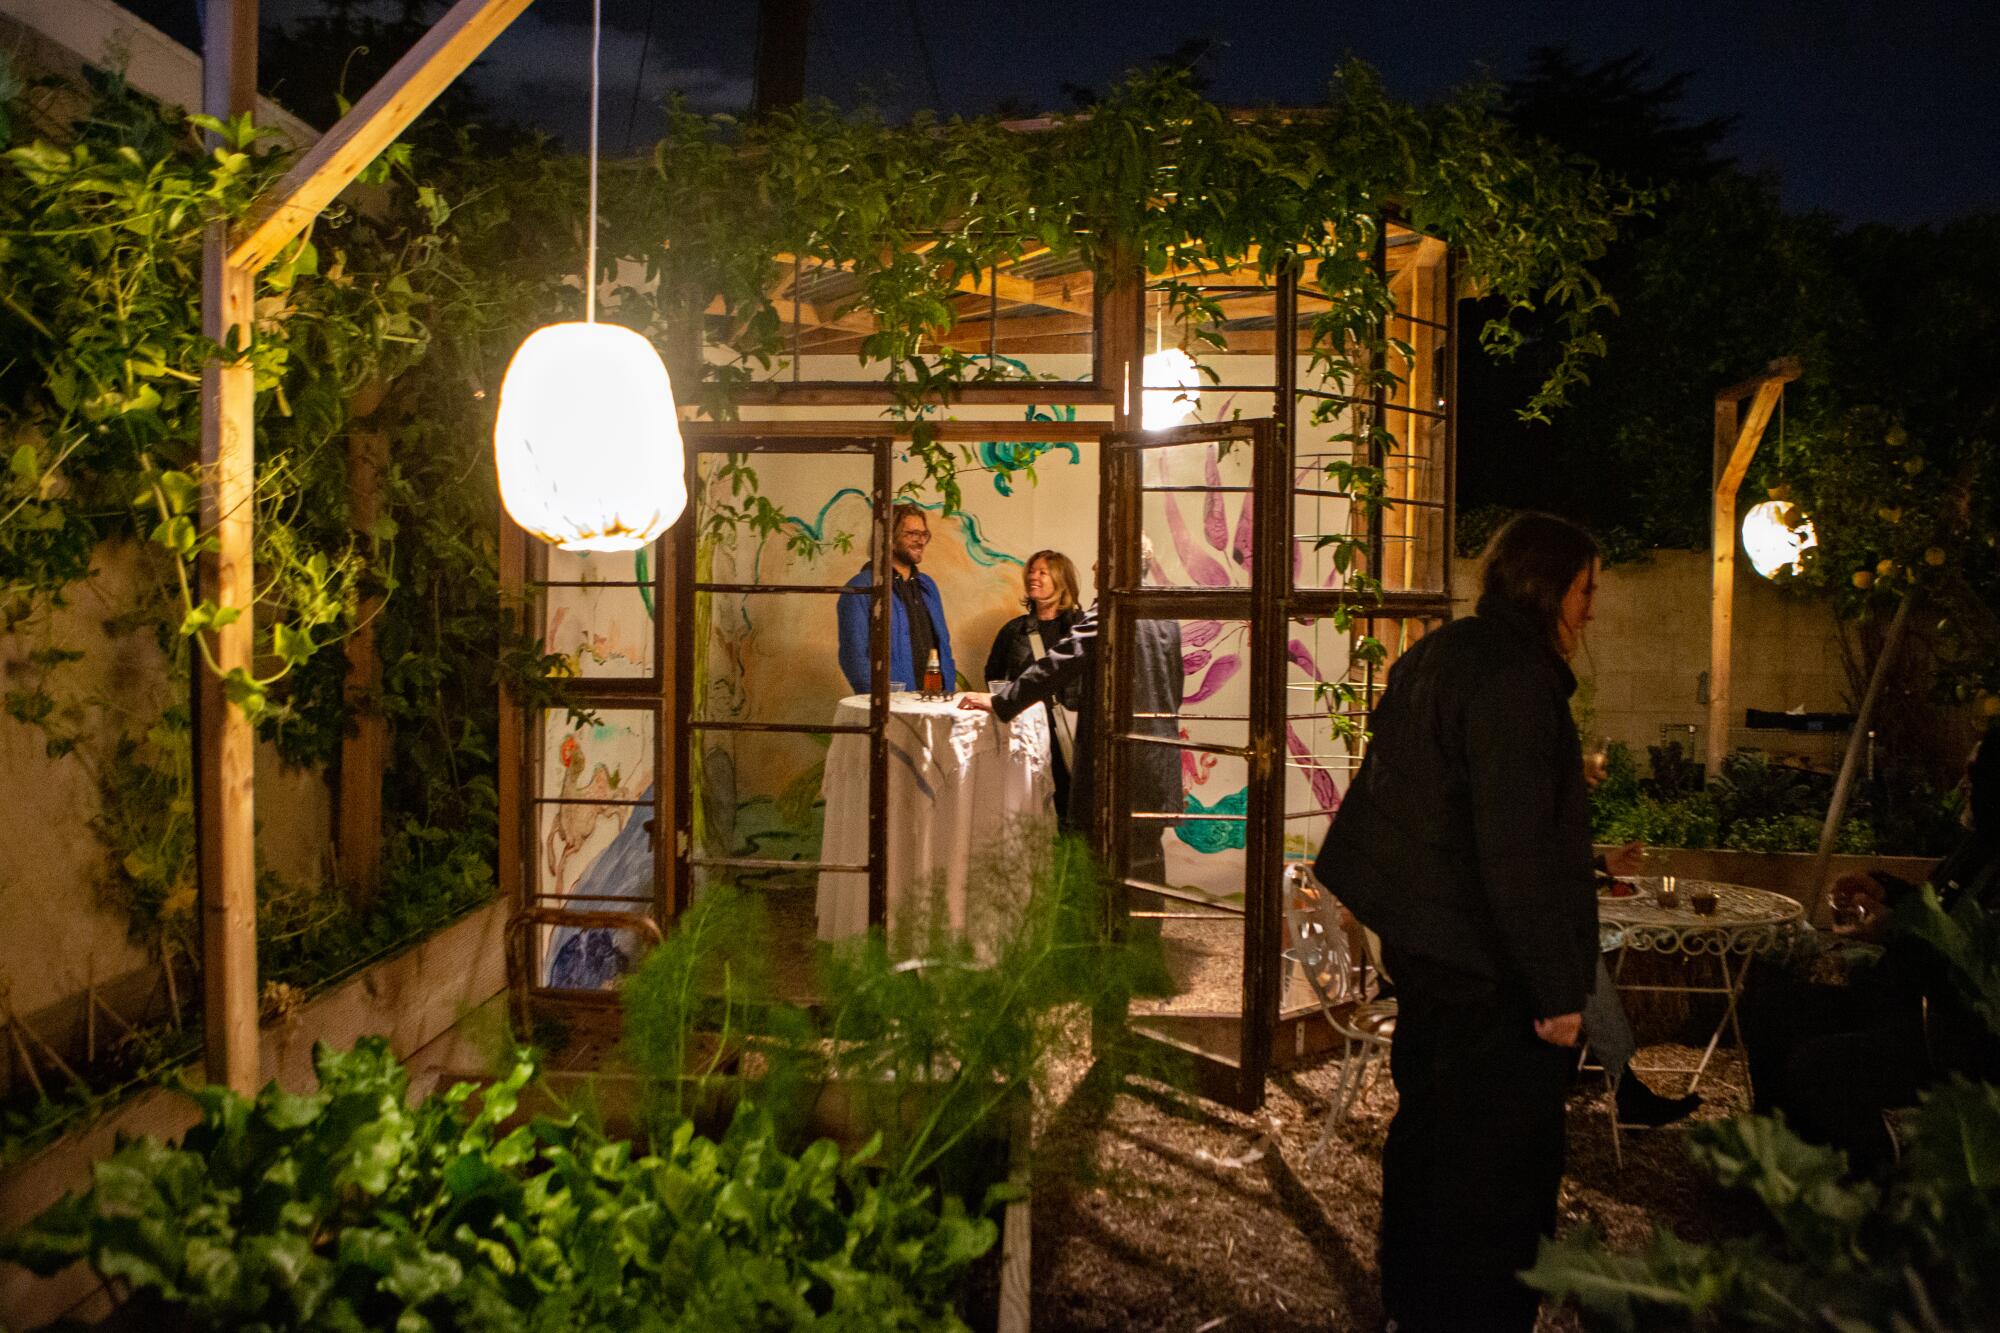 People stand in a windowed green-house gazebo filled with art on its walls 